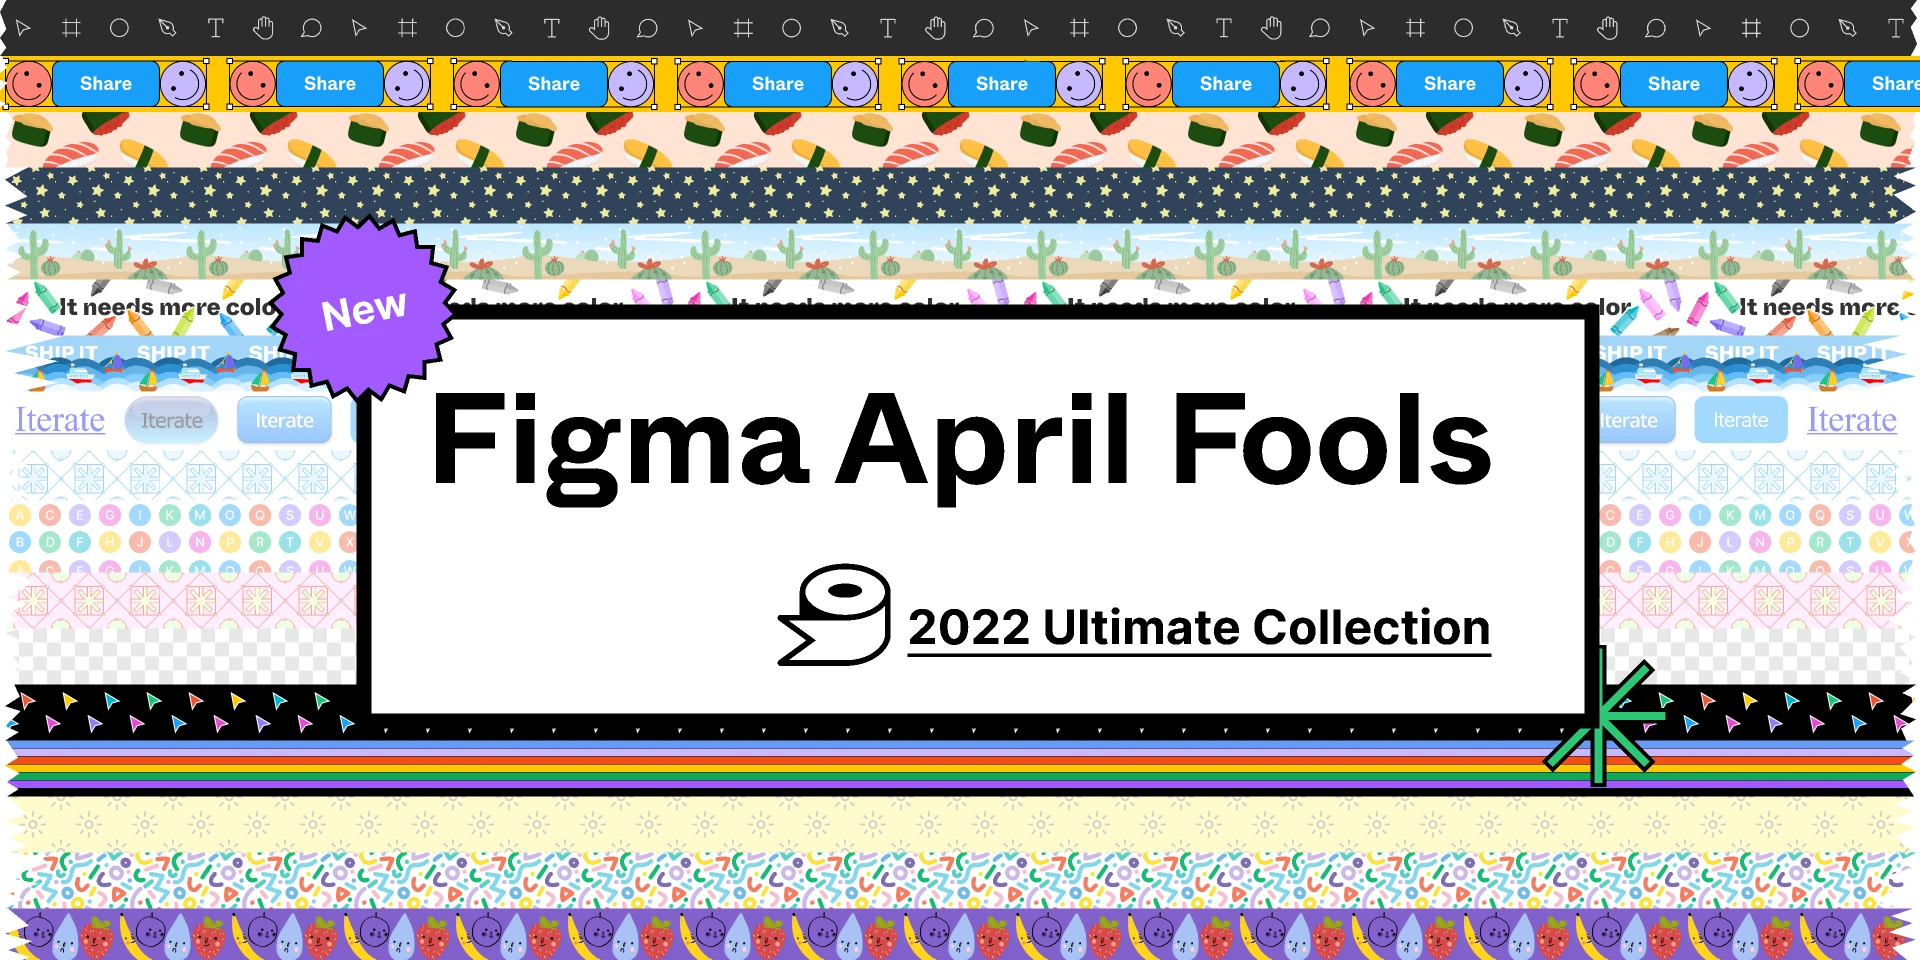 Figma Washi tape Collection (April fools 2022) for Figma and Adobe XD